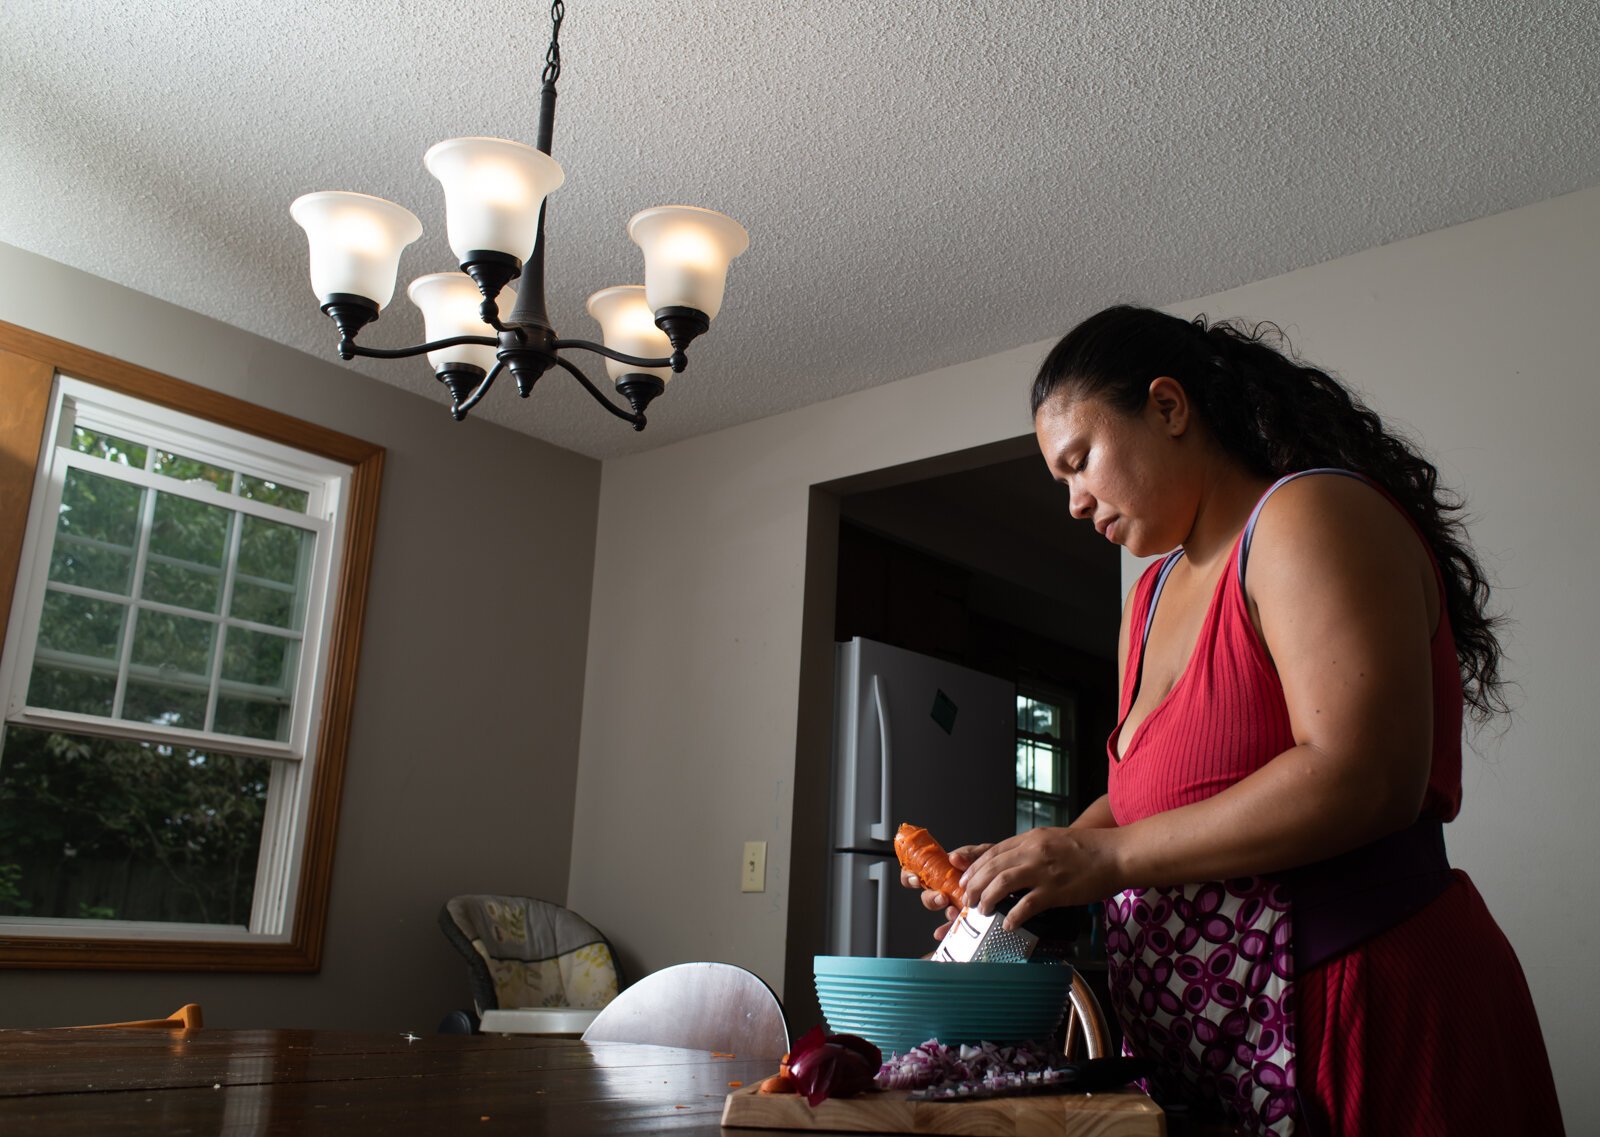 Doula/pregnancy services provider Asha Hernandez works on prepping ingredients for a postpartum meal she cooked in her home in Fort Wayne.